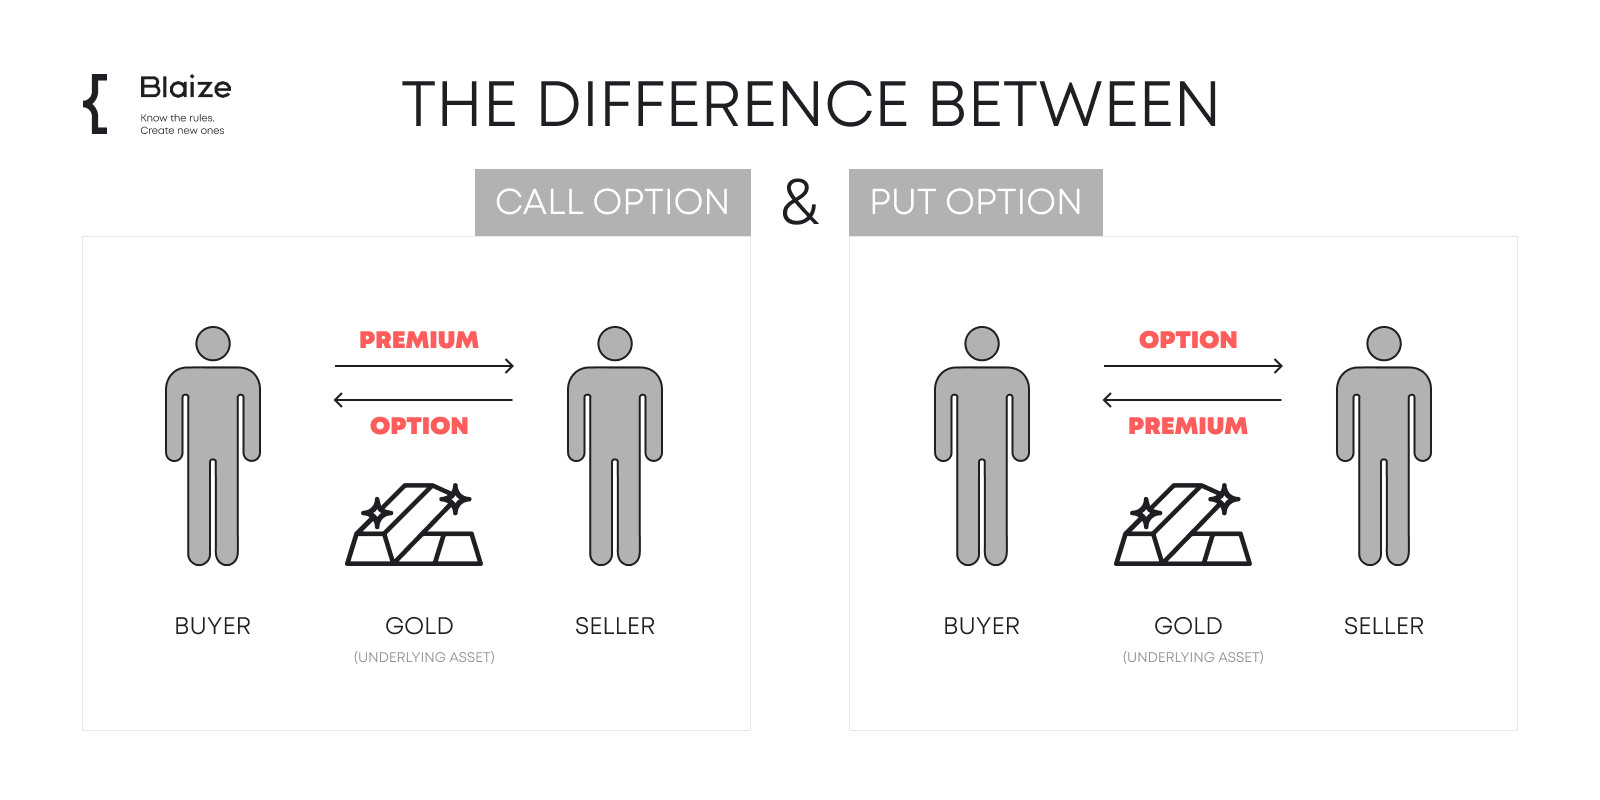 The difference between call option & put option contracts